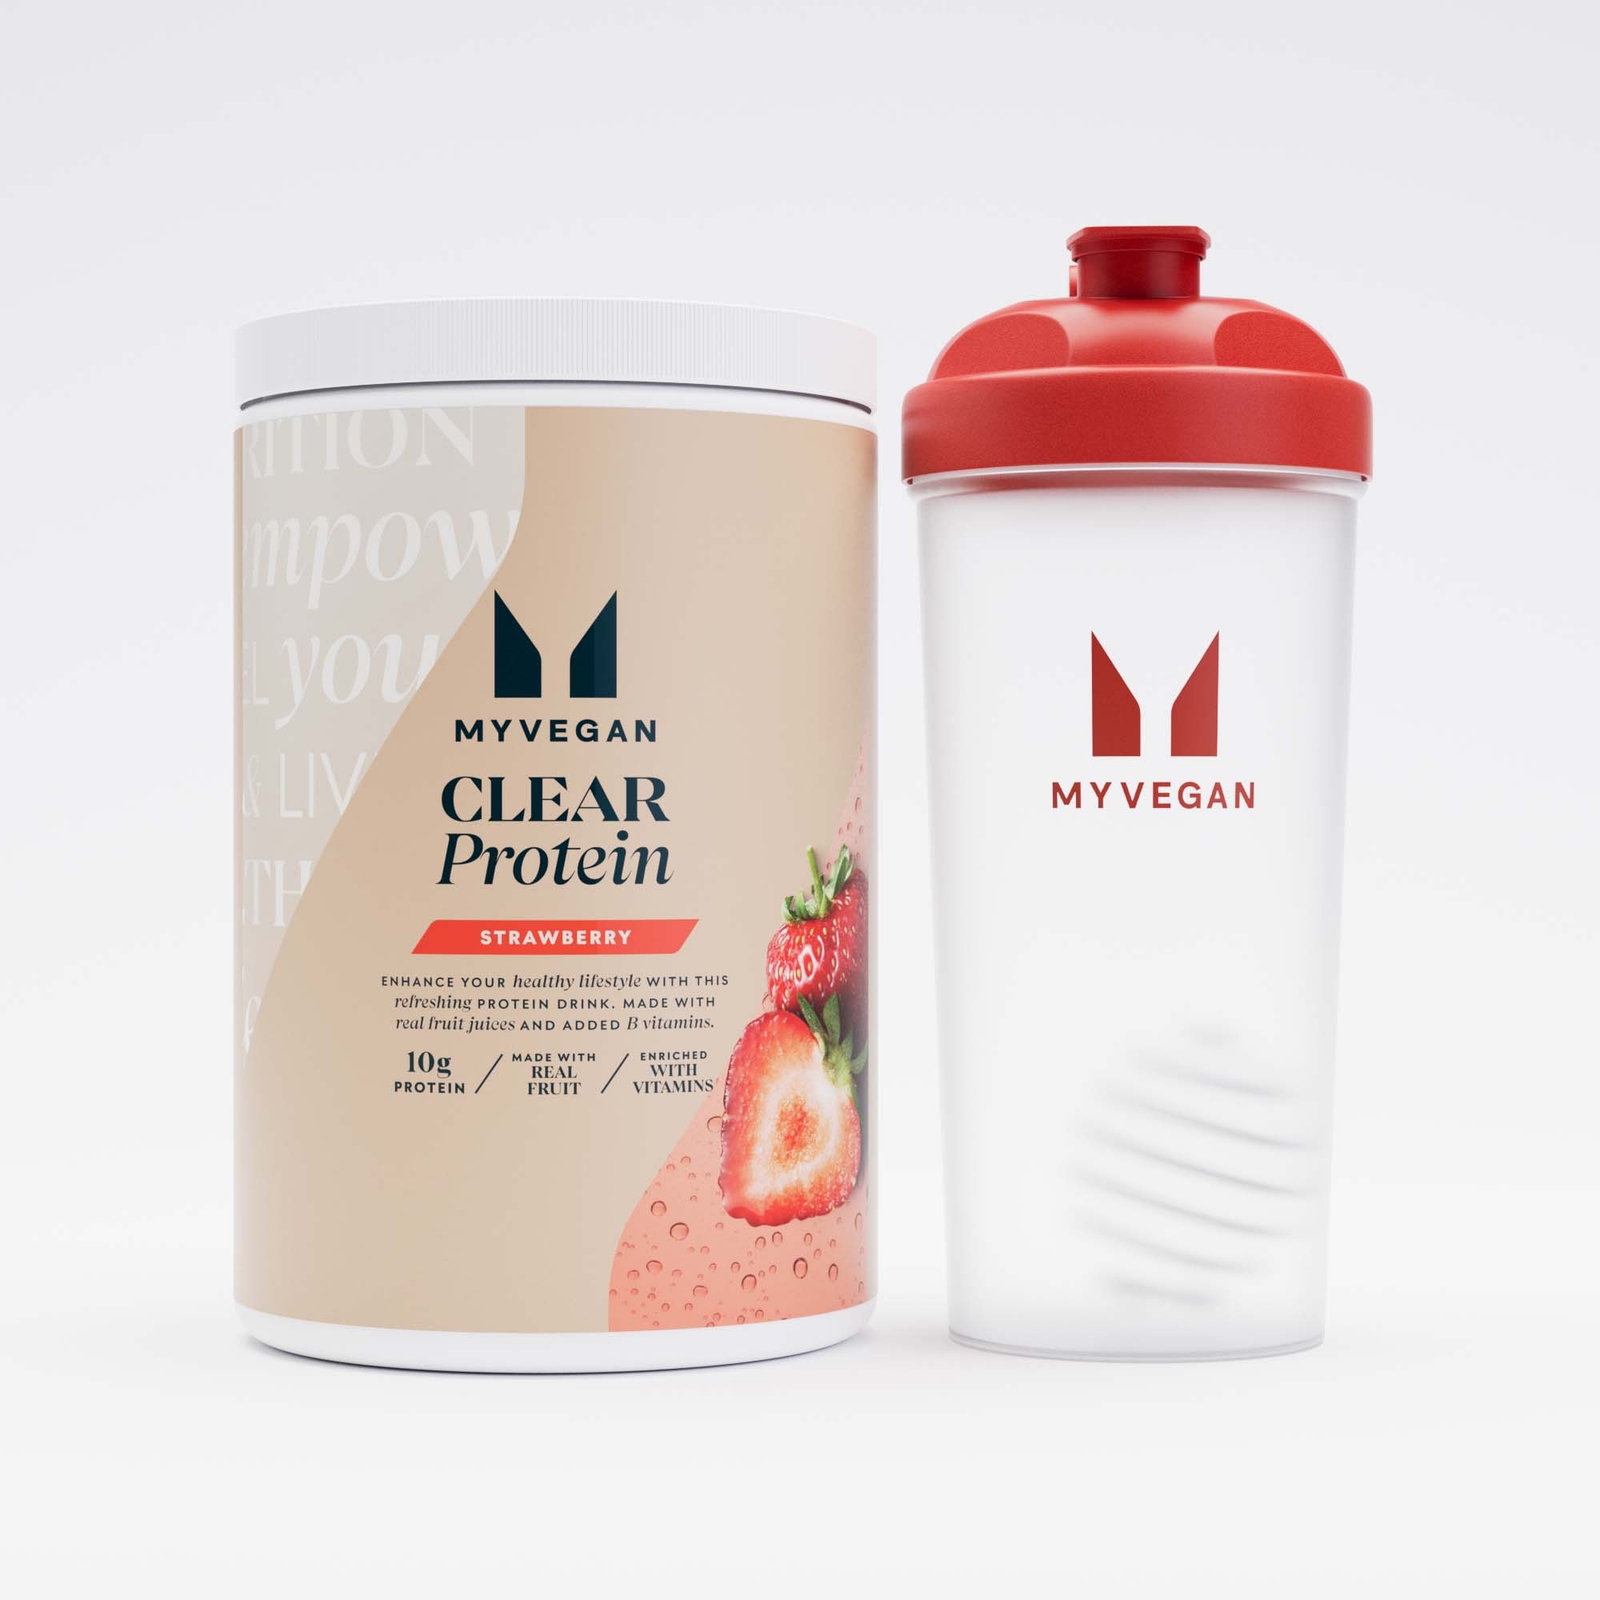 Image of Confezione base Clear Vegan Protein - Fragola